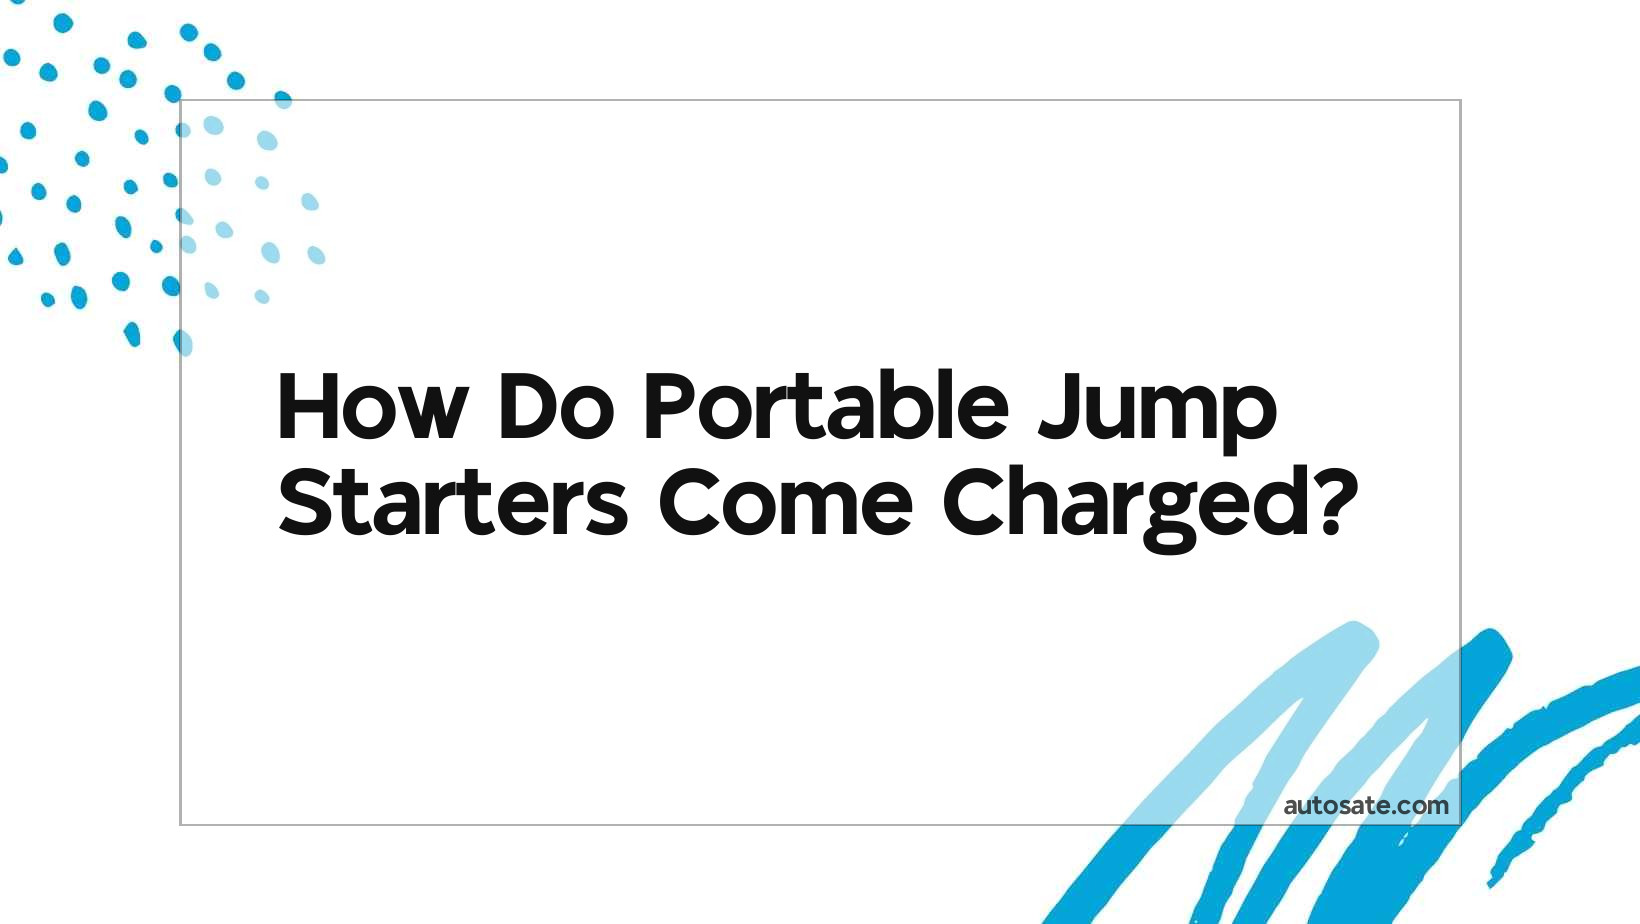 Do Portable Jump Starters Come Charged